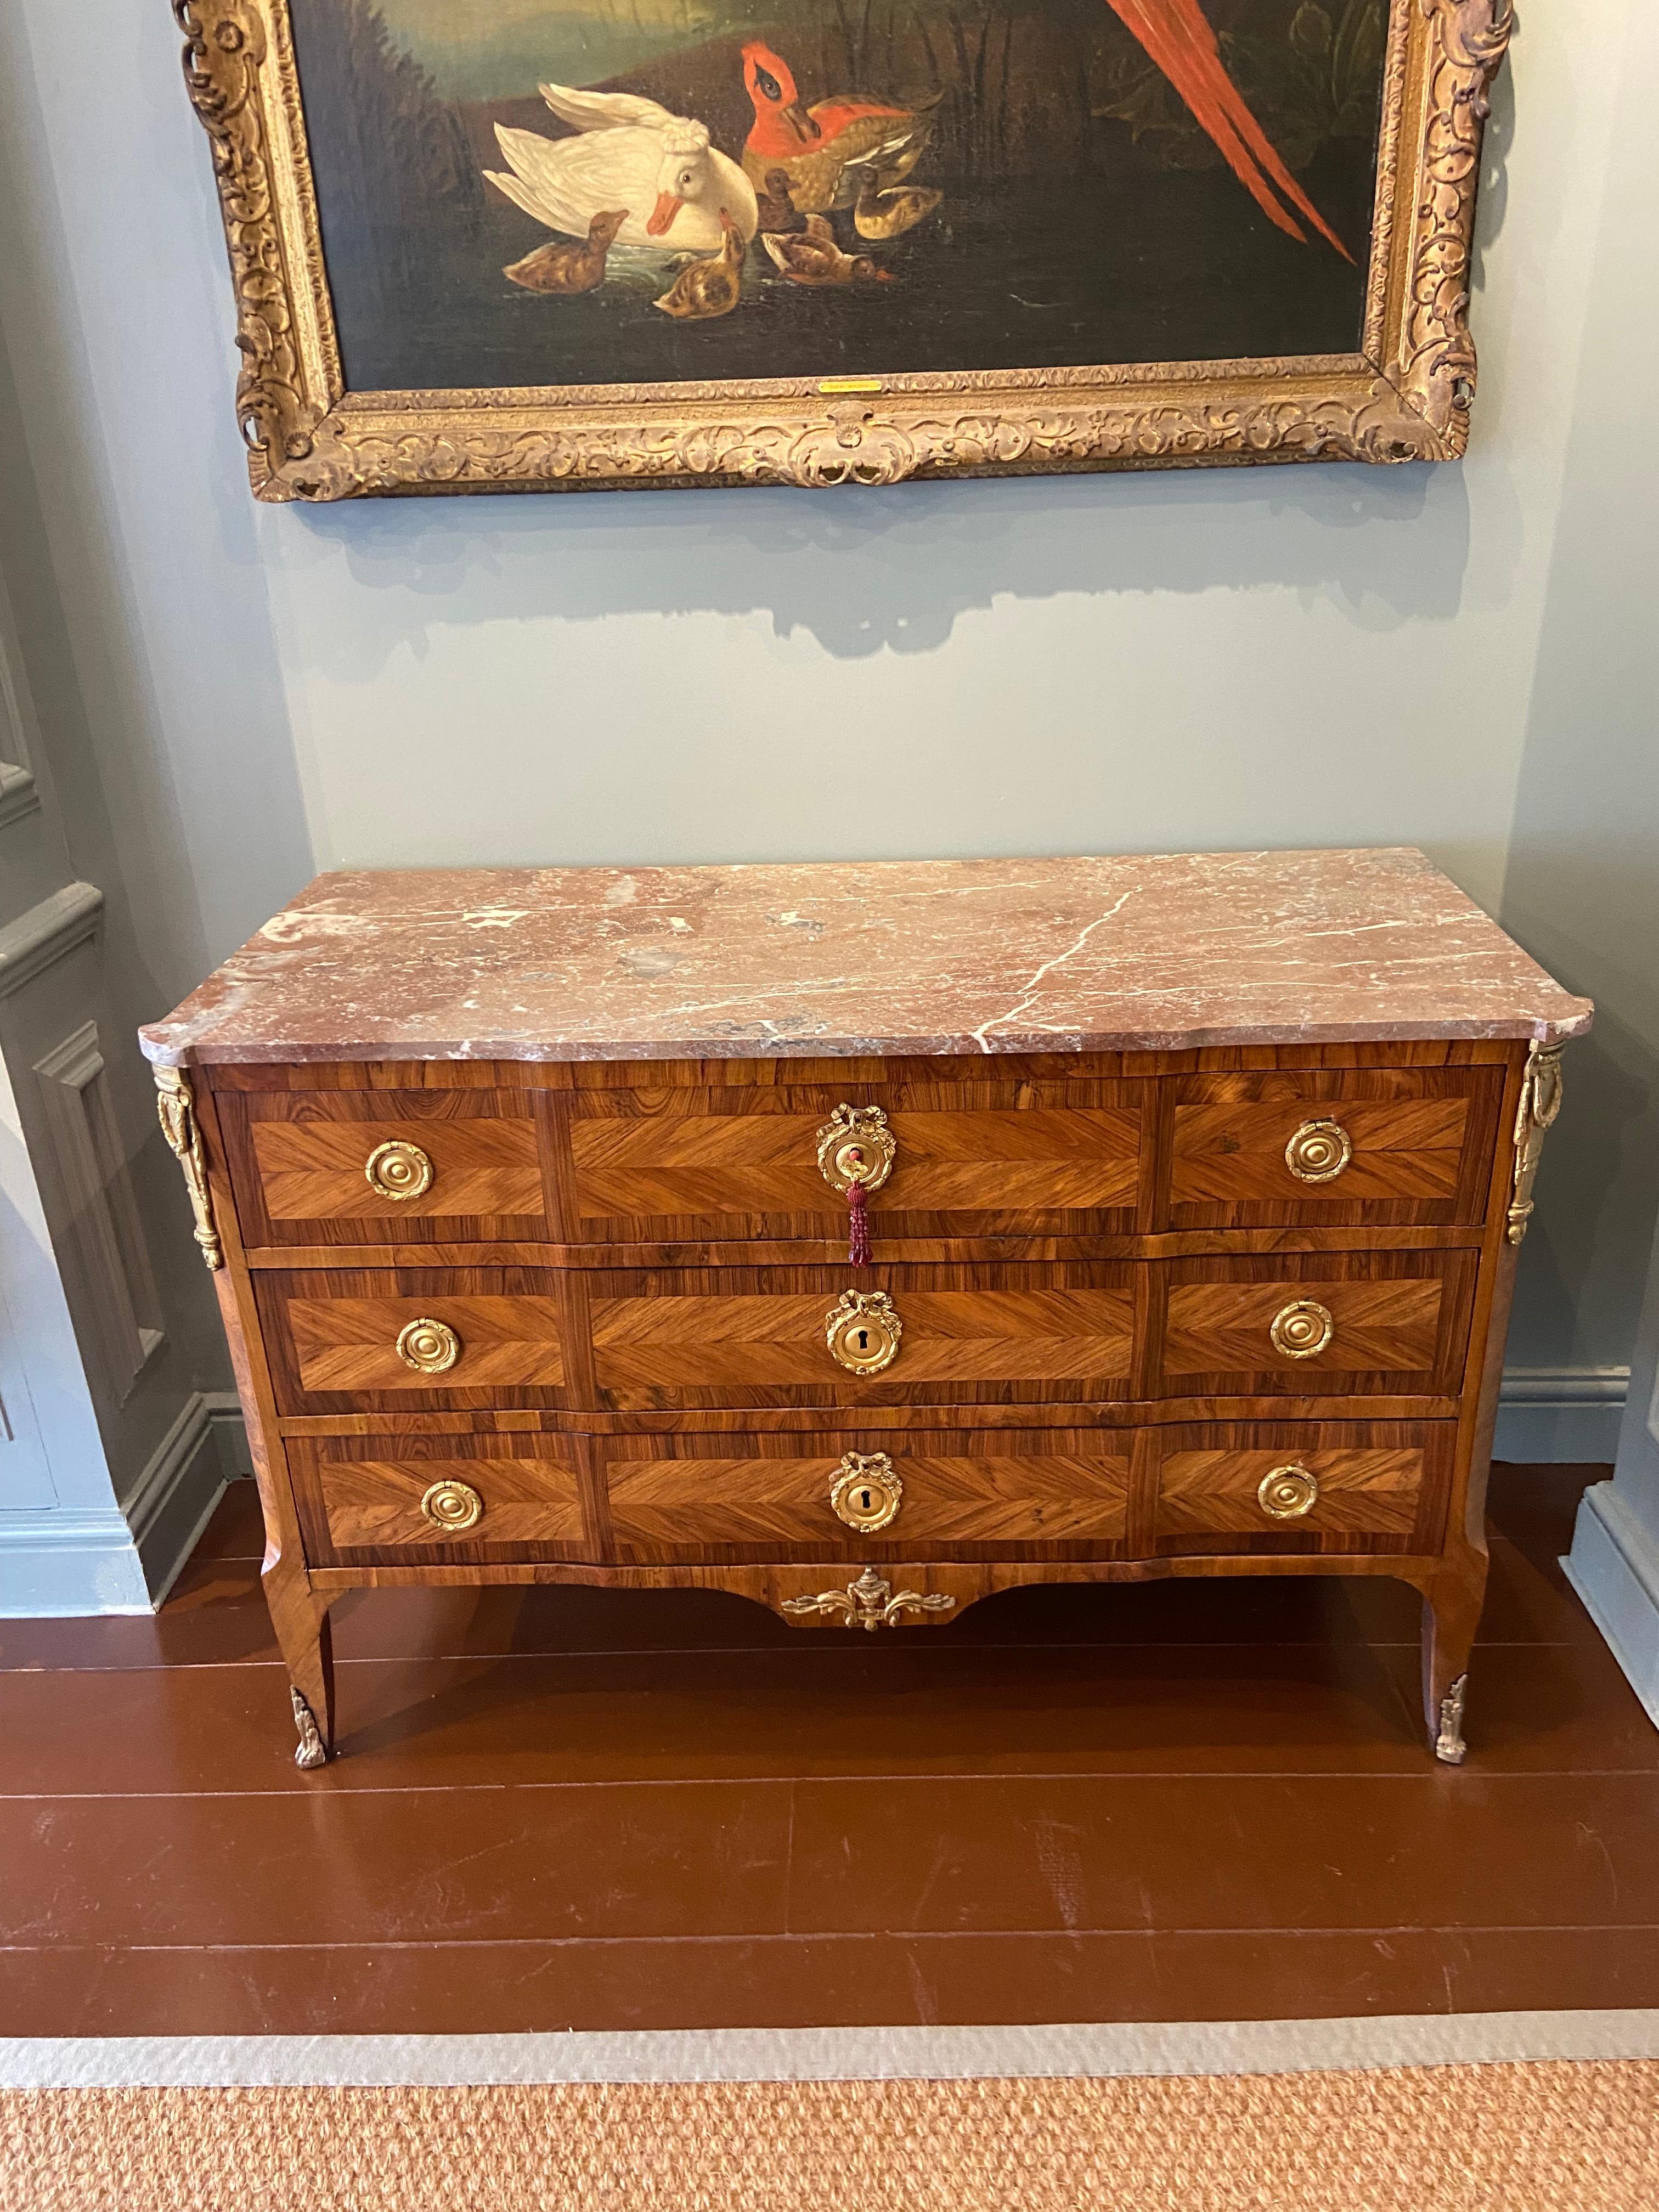 Louis XV Ormolu-Mounted Kingwood and Fruitwood Commode 'Mid 18th Century' For Sale 3